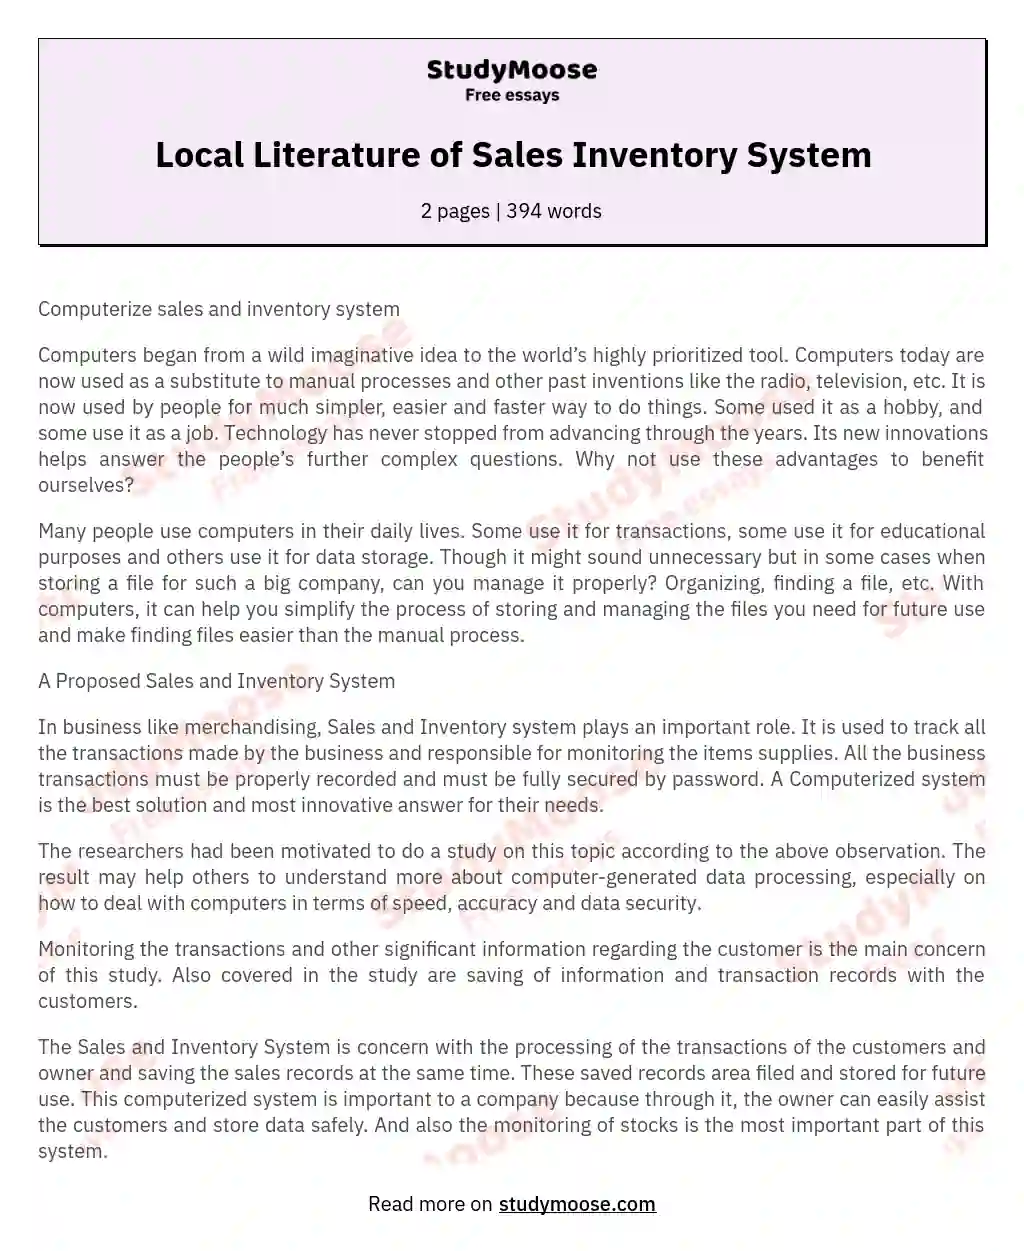 Local Literature of Sales Inventory System essay